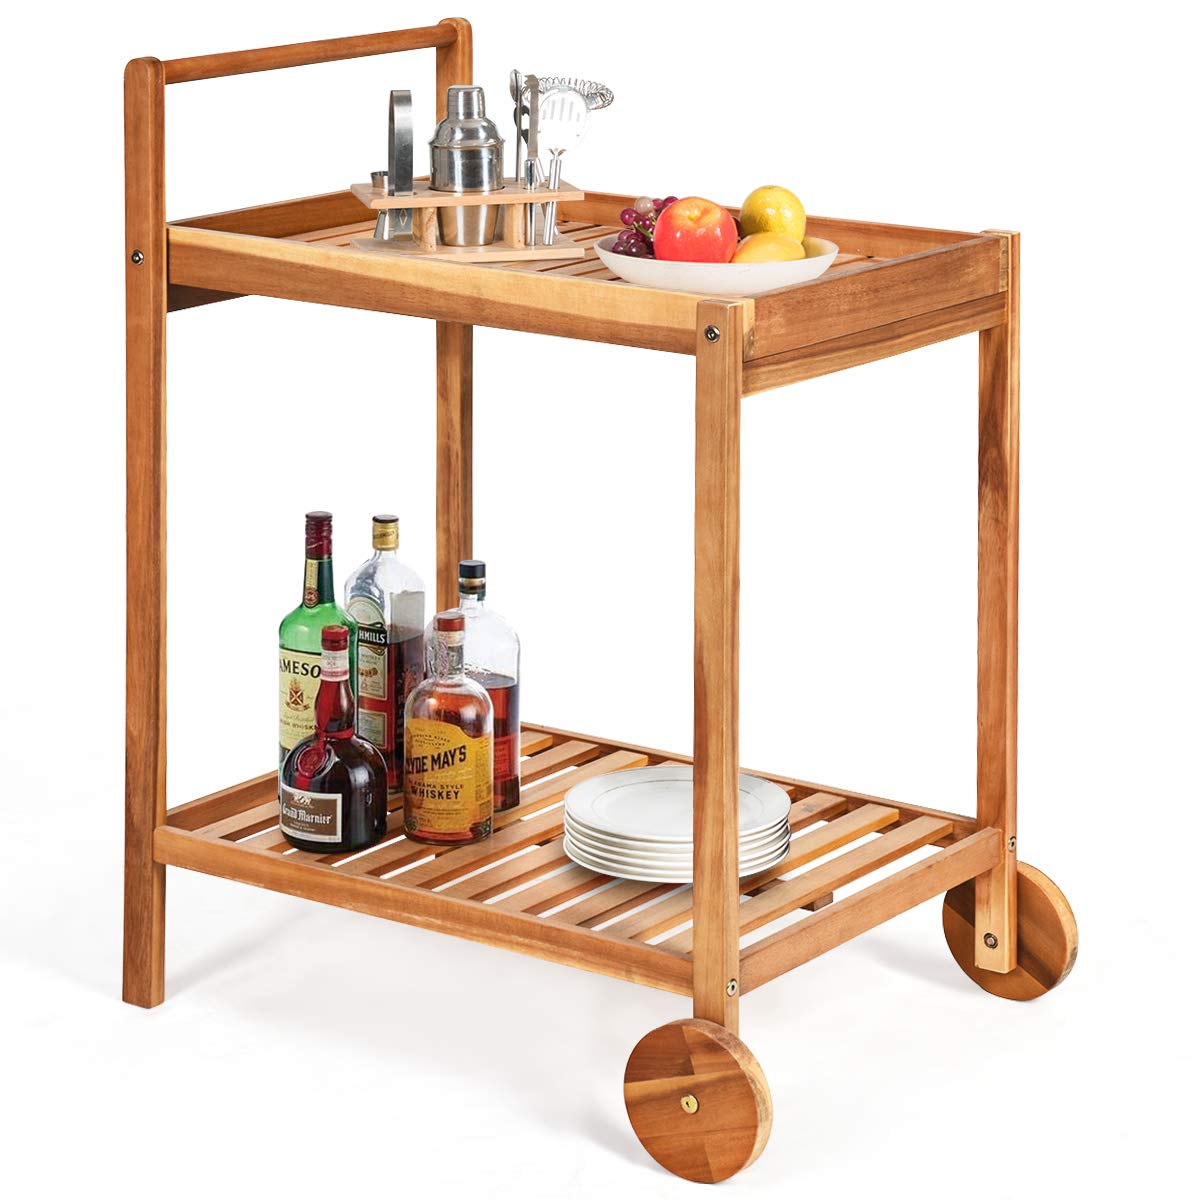 Patio Bar Cart Rolling Trolley Cart with 2 Trays, Portable Kitchen Serving Cart w/Wheels - tANGKULA